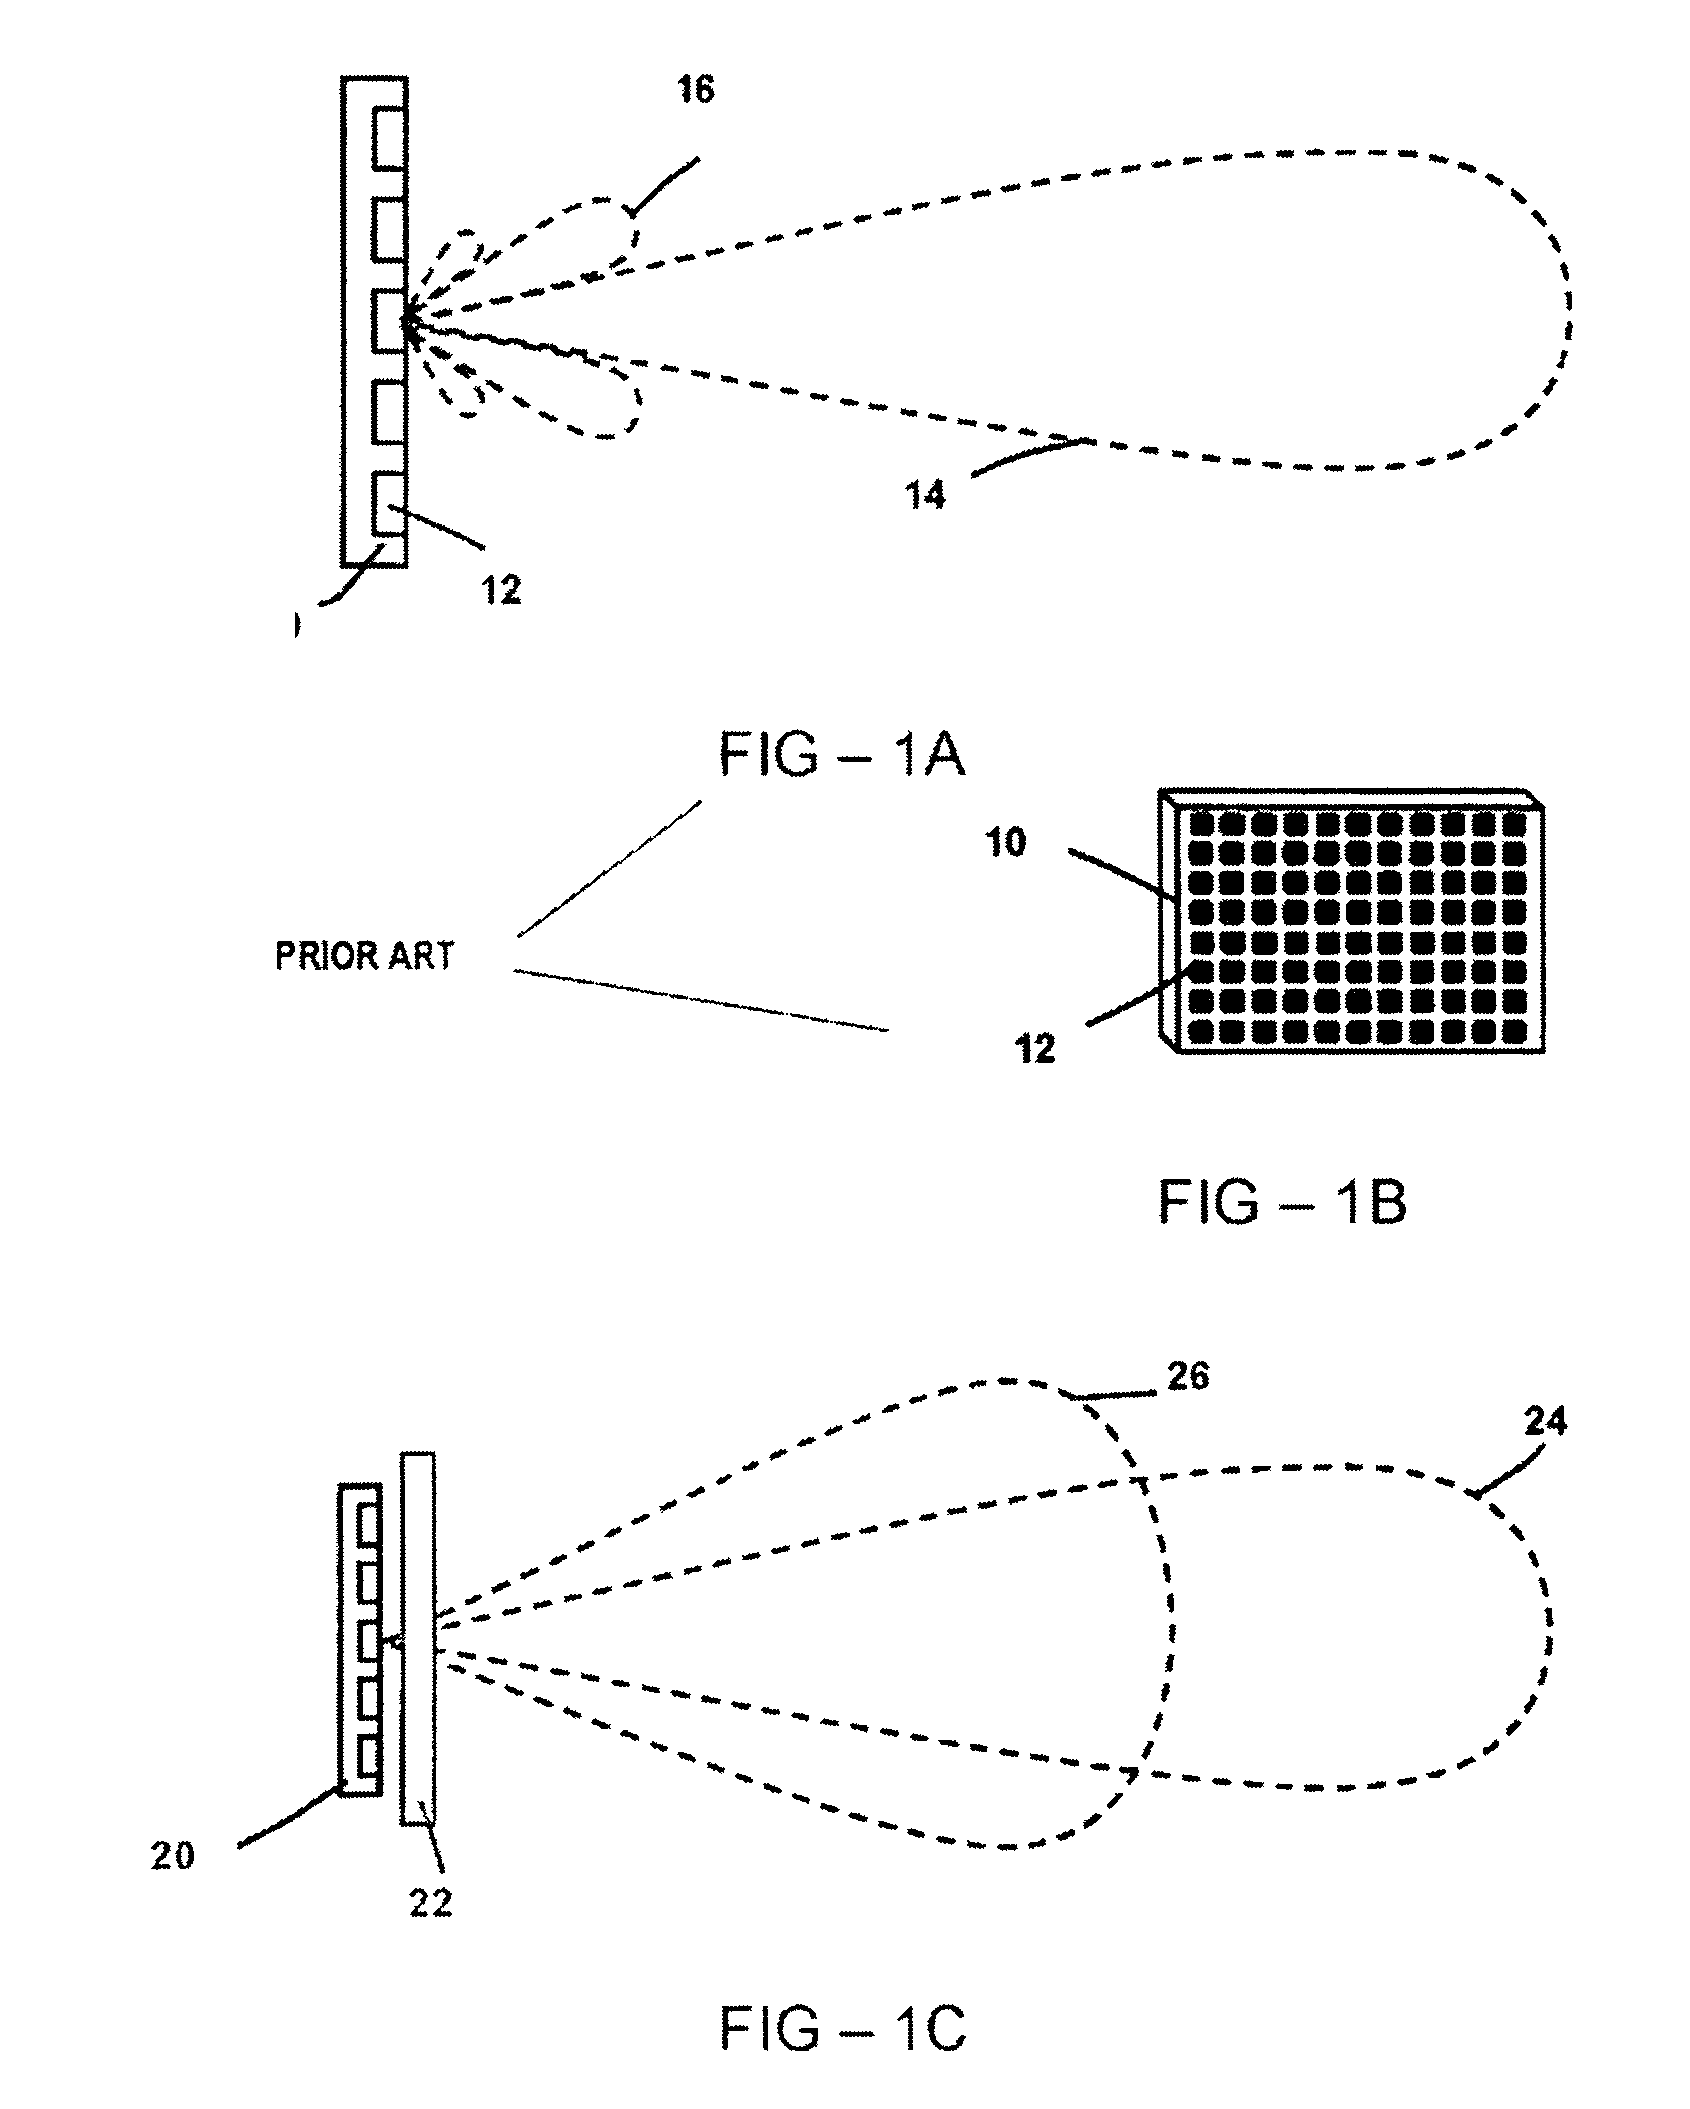 Radar system with an active lens for adjustable field of view